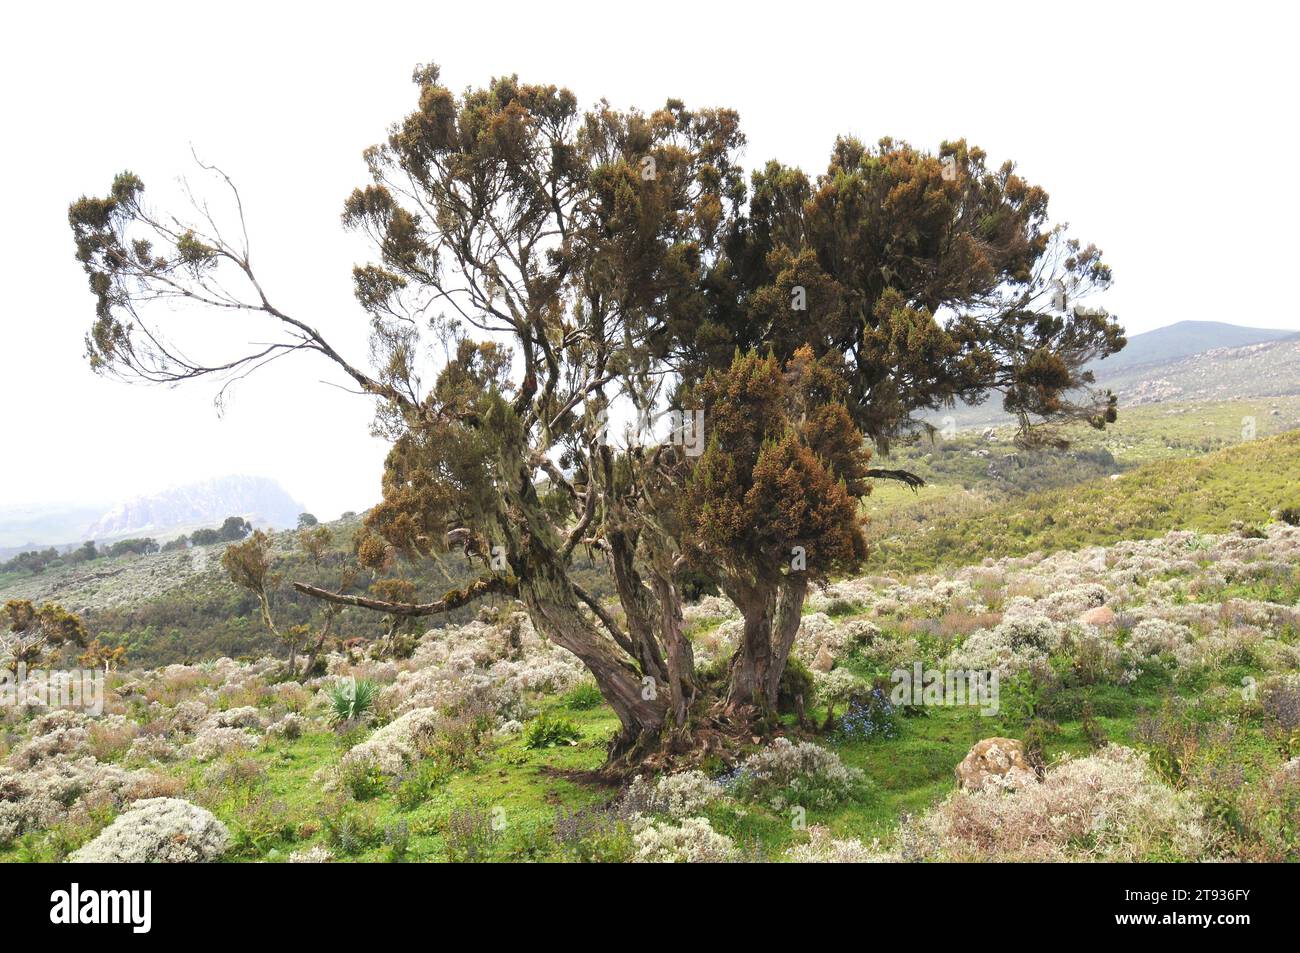 Giant heather (Erica arborea) is a shrub or small tree native to Mediterranean basin, Canary Islands and western Africa mountains. This photo was take Stock Photo